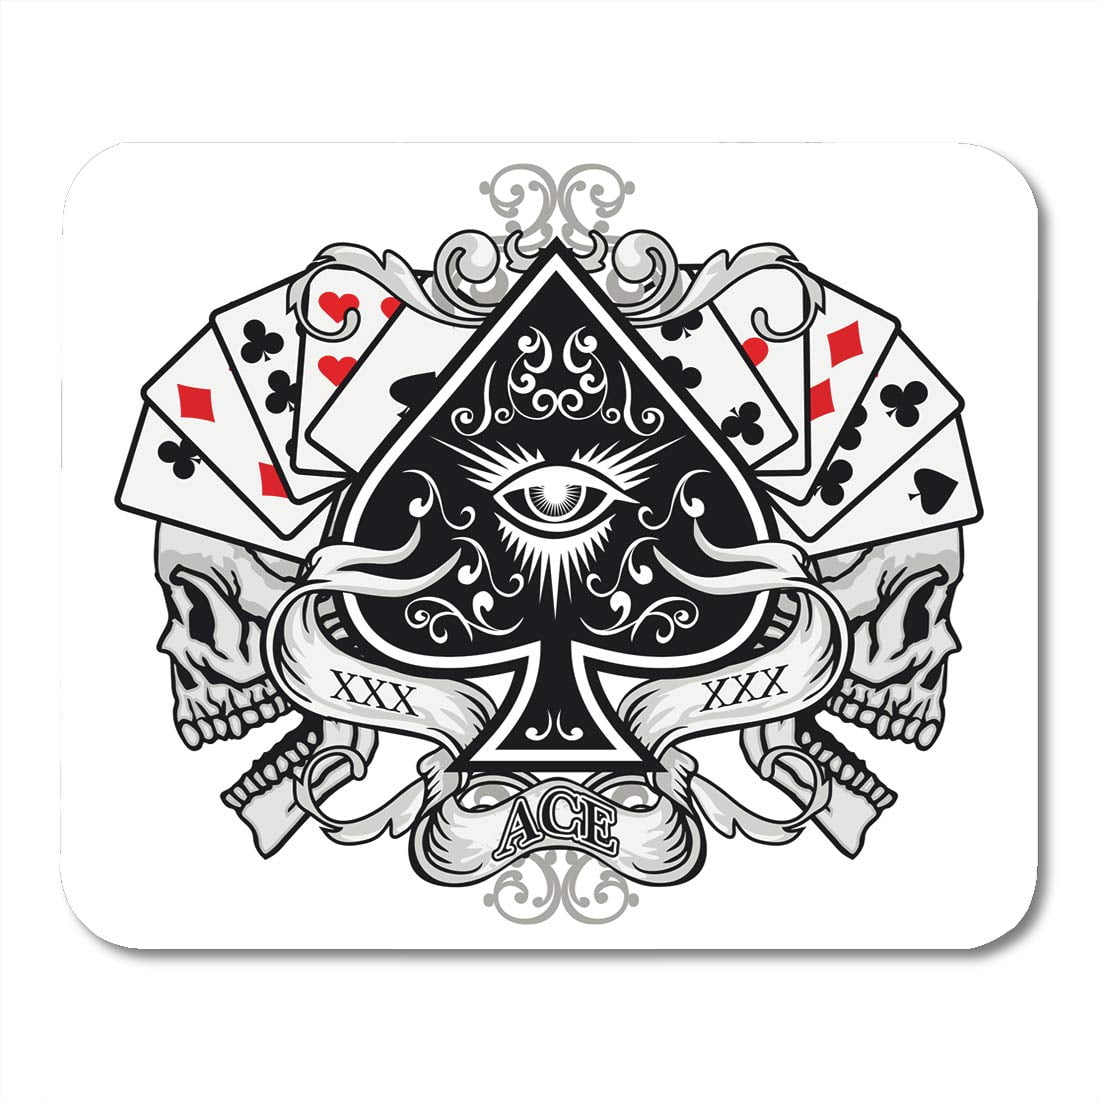 Queen Of Spades Cum Filled Panties - Queen Gothic of Arms Skull and Ace Spades Vintage King Pirate Zombie  Mousepad Mouse Pad Mouse Mat 9x10 inch - Walmart.com